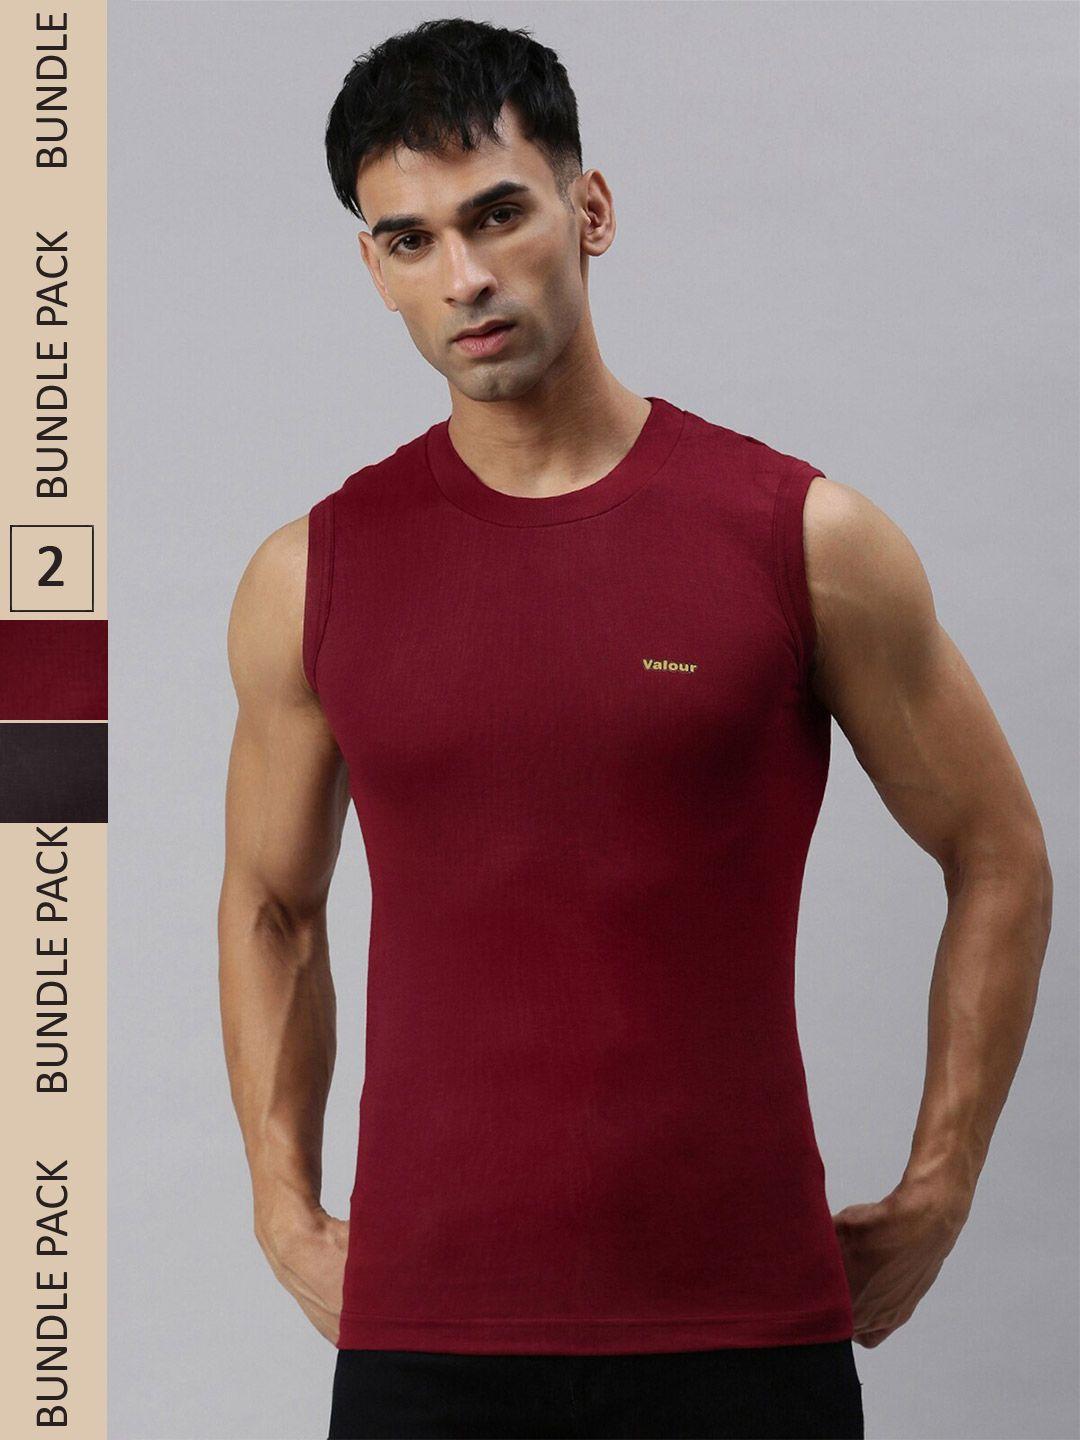 lux-cozi-pack-of-2-slim-fit-sleeveless-t-shirts